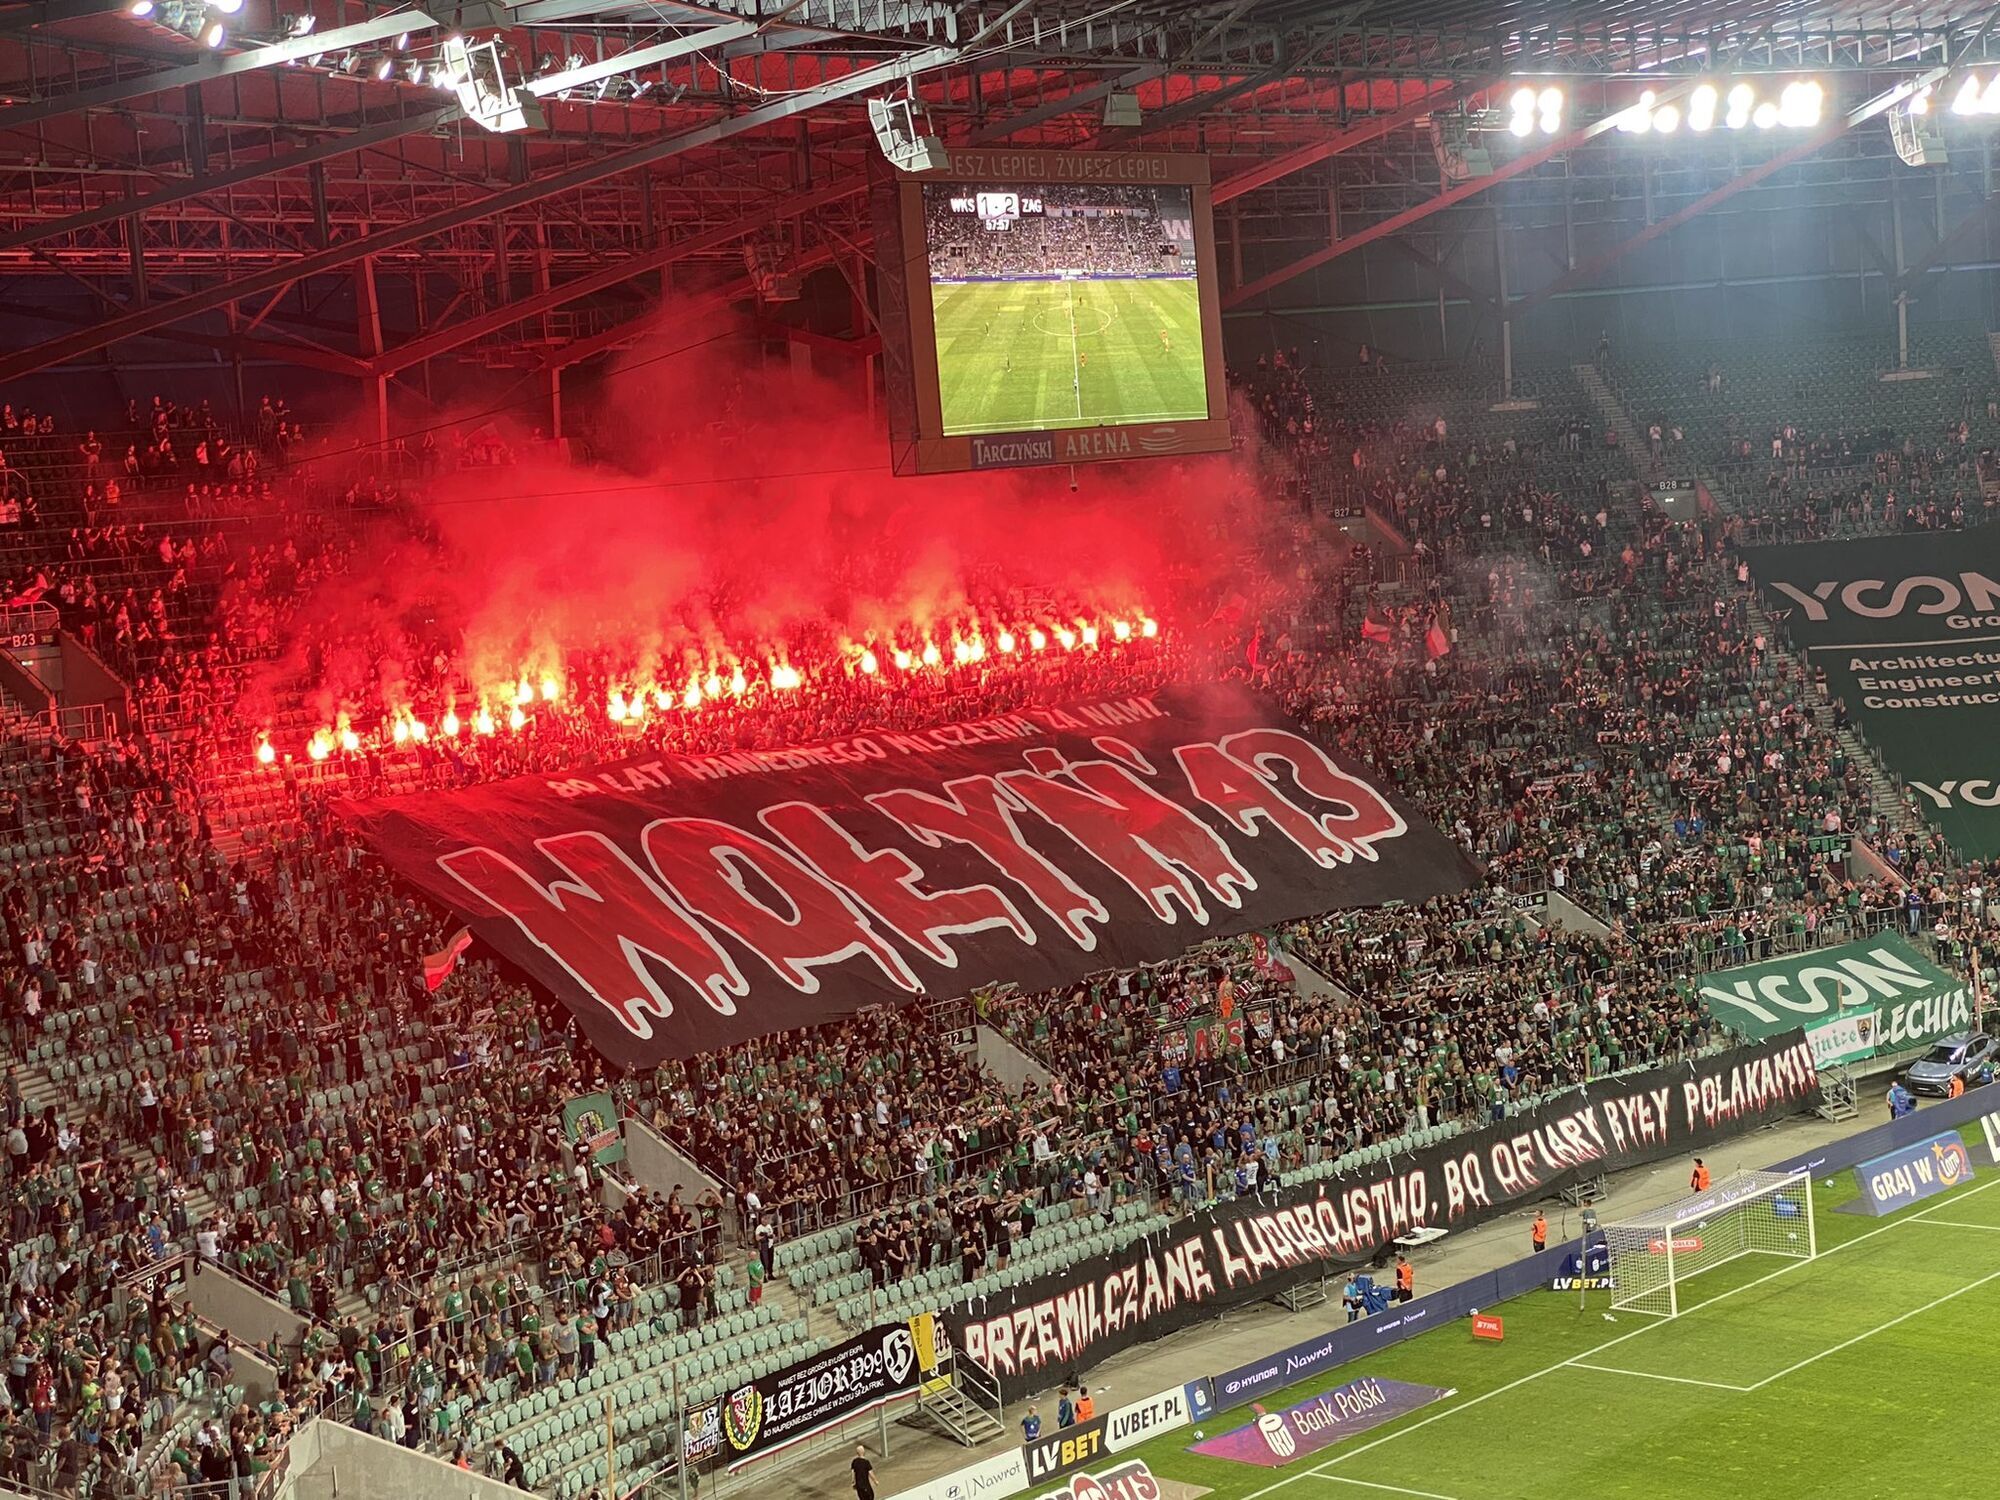 Poland protested against Ukraine by posting offensive banners during a soccer game. Photo fact